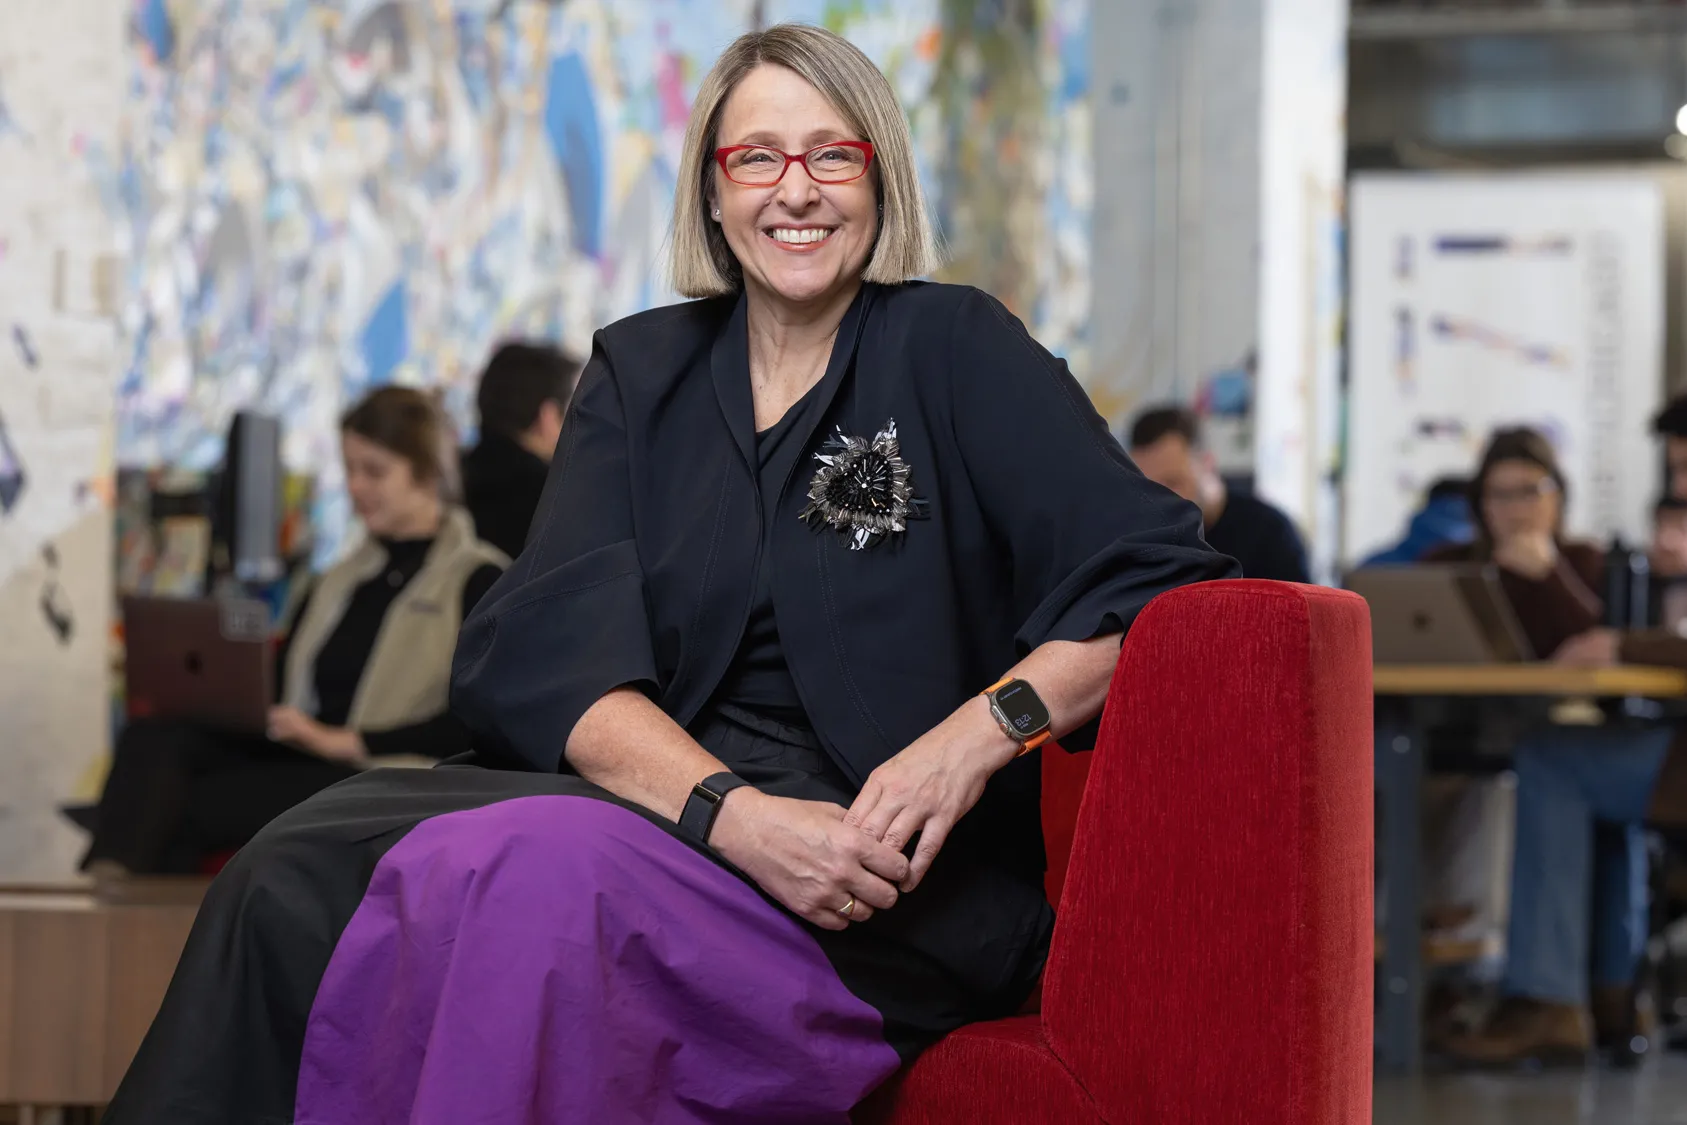 Betsy Ziegler sits on a modern upholstered chair in a space where many people in the background work or chat at small tables. A wall-size painting in the background adds to the lively feel of the scene, while Betsy poses with a genuine smile at the center of it. The middle-age white woman looks comfortable and stylish, with a chin-length haircut, stand-out glasses, modern-shaped clothes and a striking beaded broach that shines but also looks organically shaped.